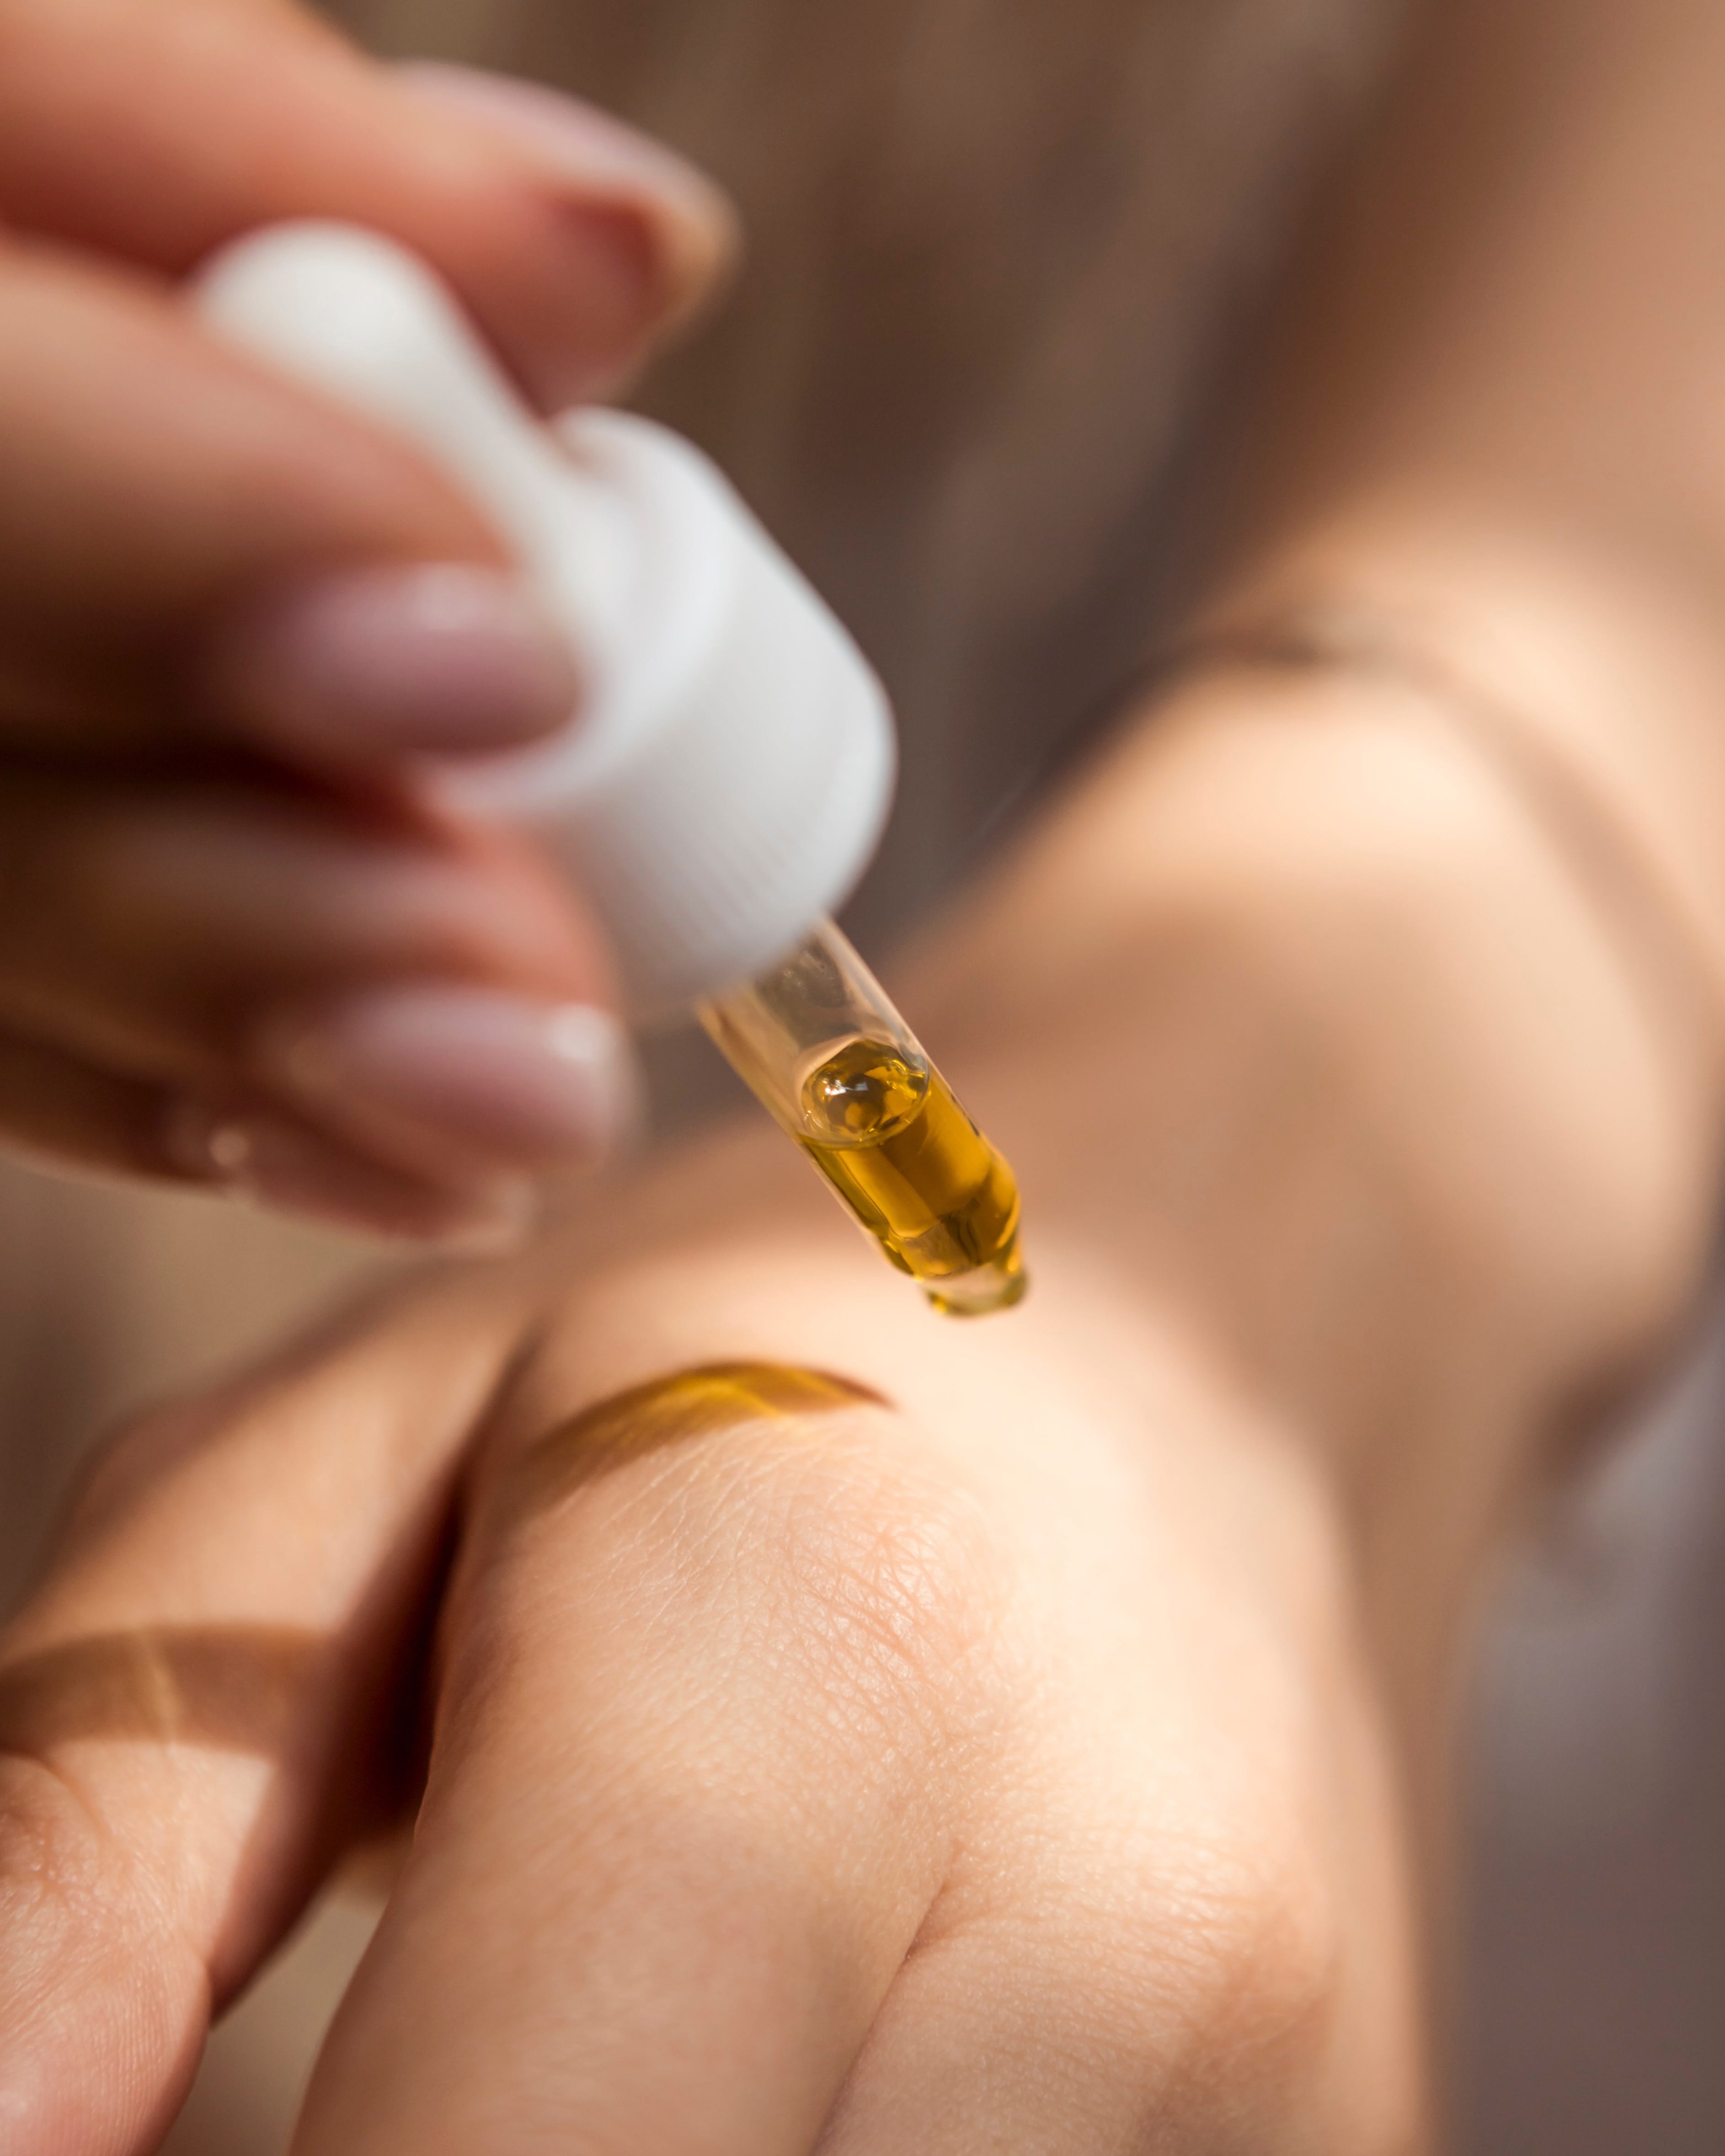 Woman holding dropper of oil over the back of her hand; image by Enecta Cannabis extracts, via Unsplash.com.